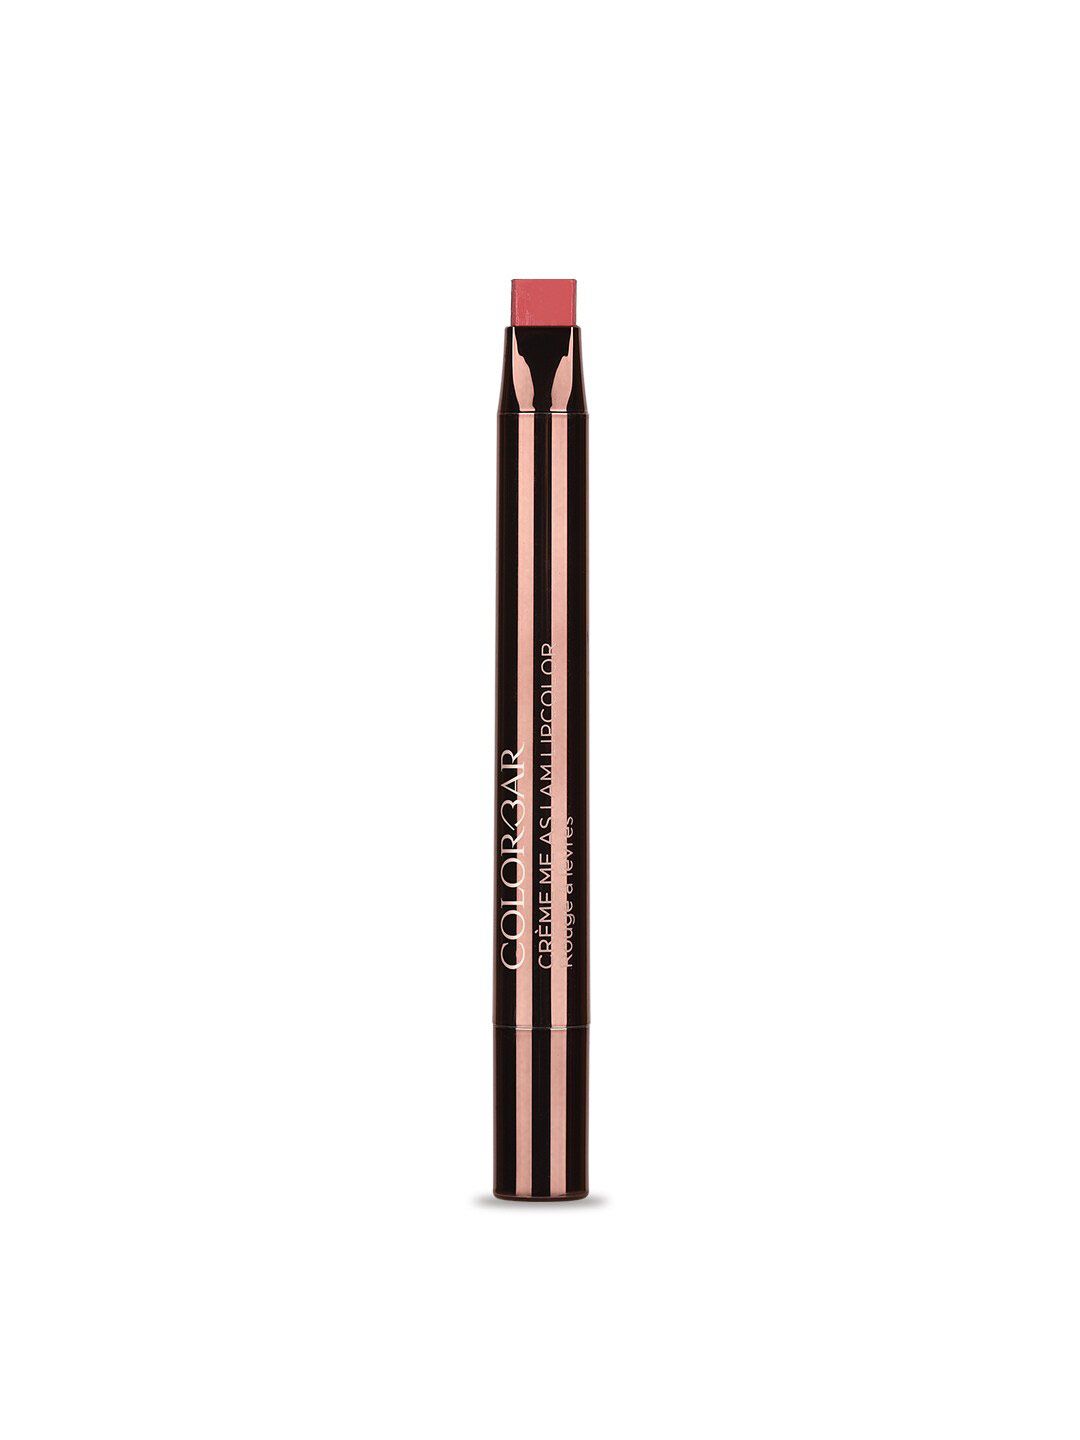 Colorbar Crme me as I am - Sherry - 009 Price in India